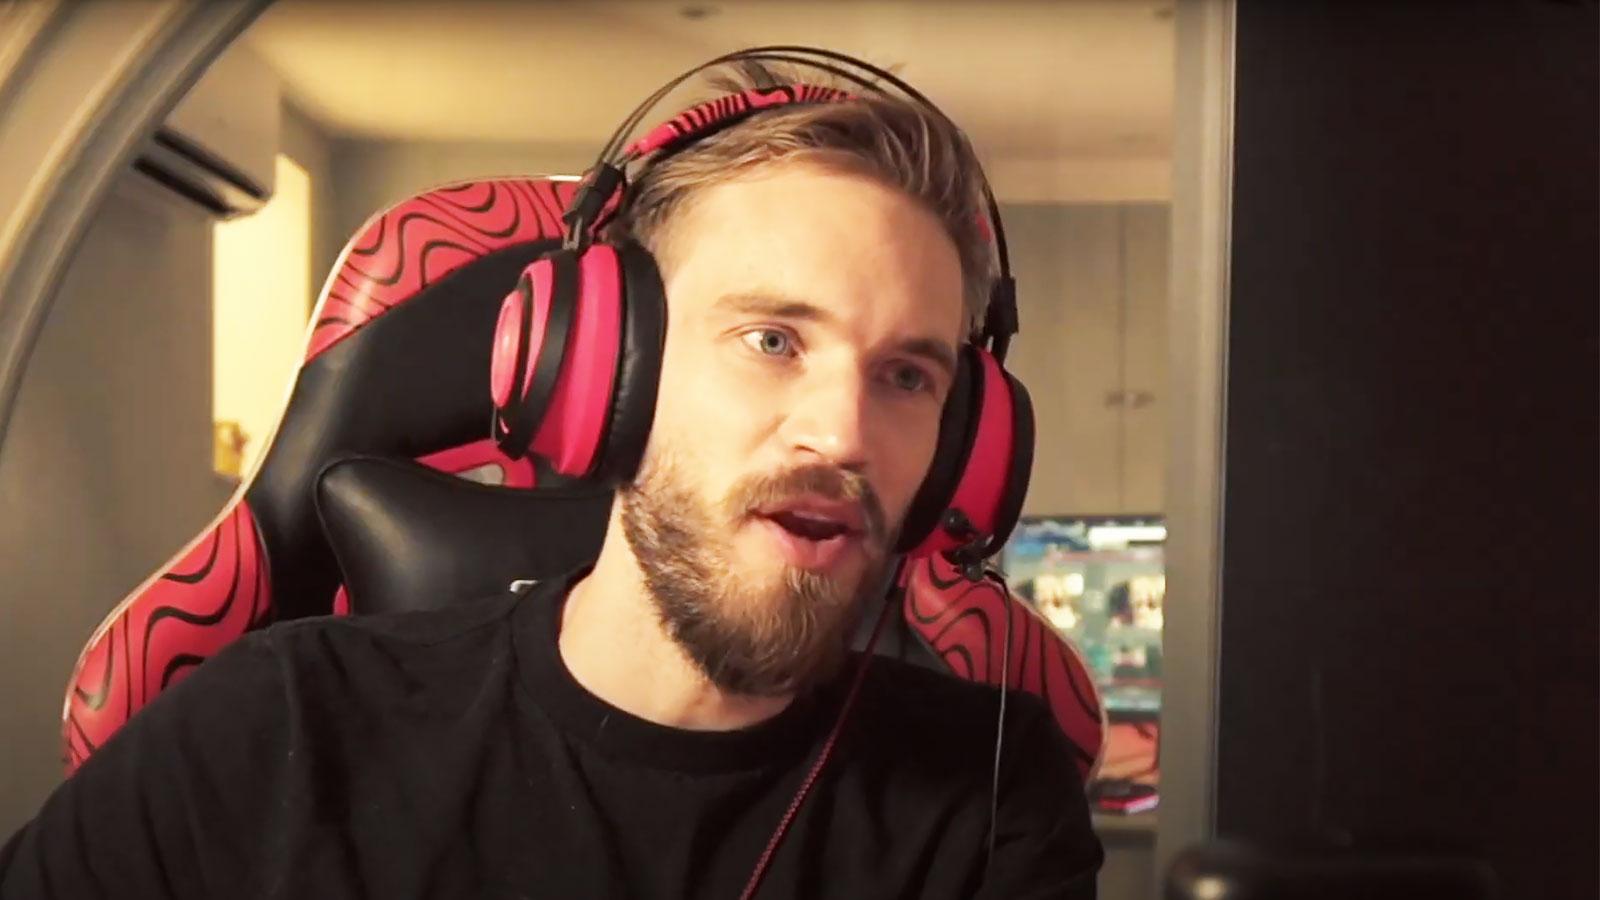 PewDiePie looks at his computer monitor.